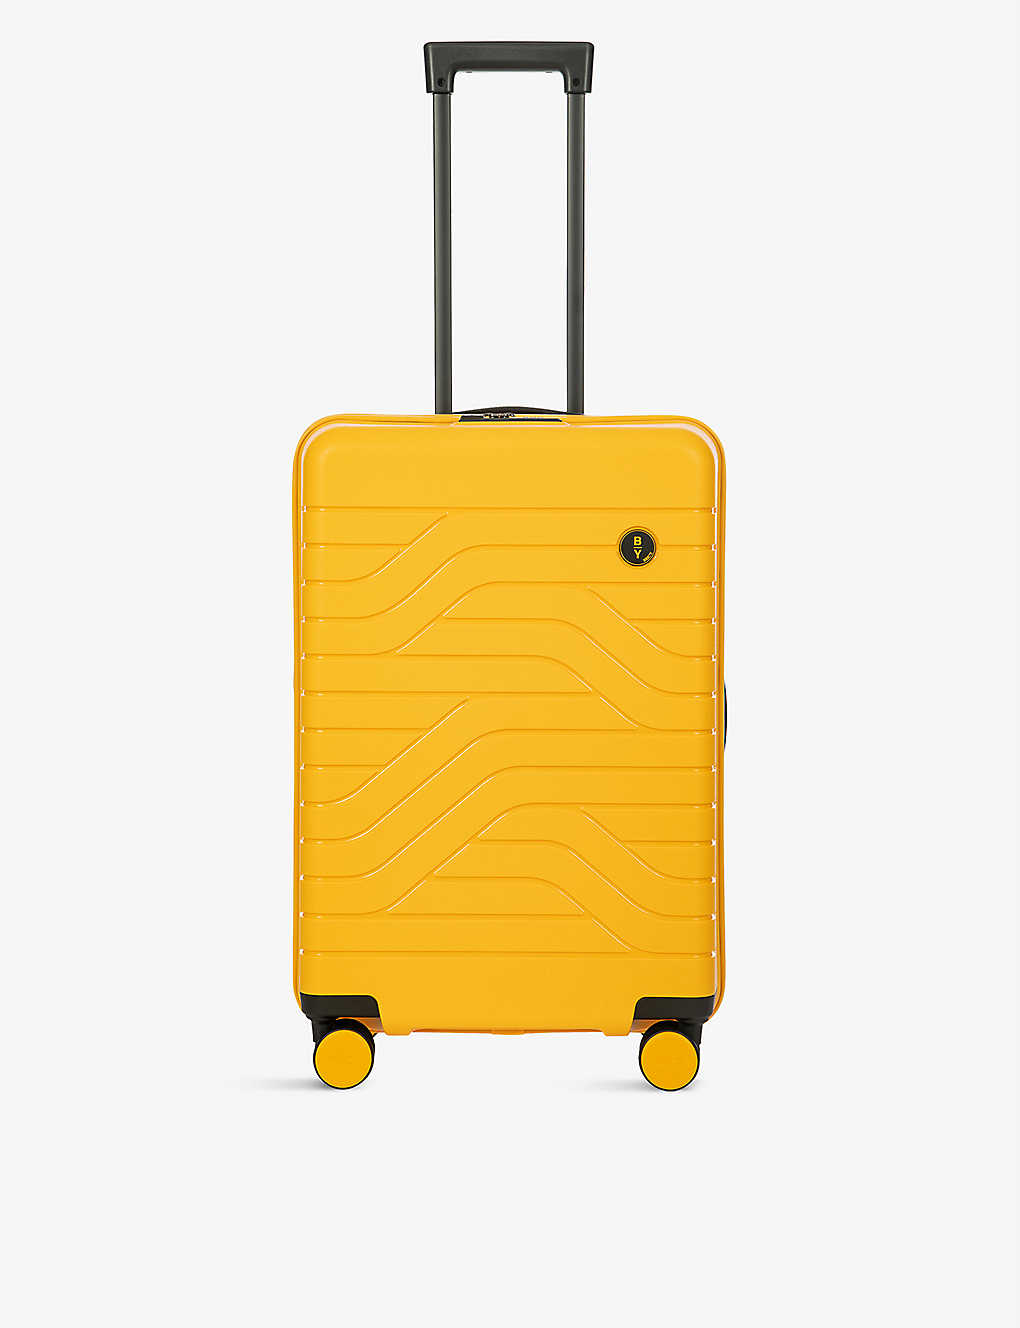 By By Brics Ulisse Hard-shell Carry-on Suitcase 55cm In Mango